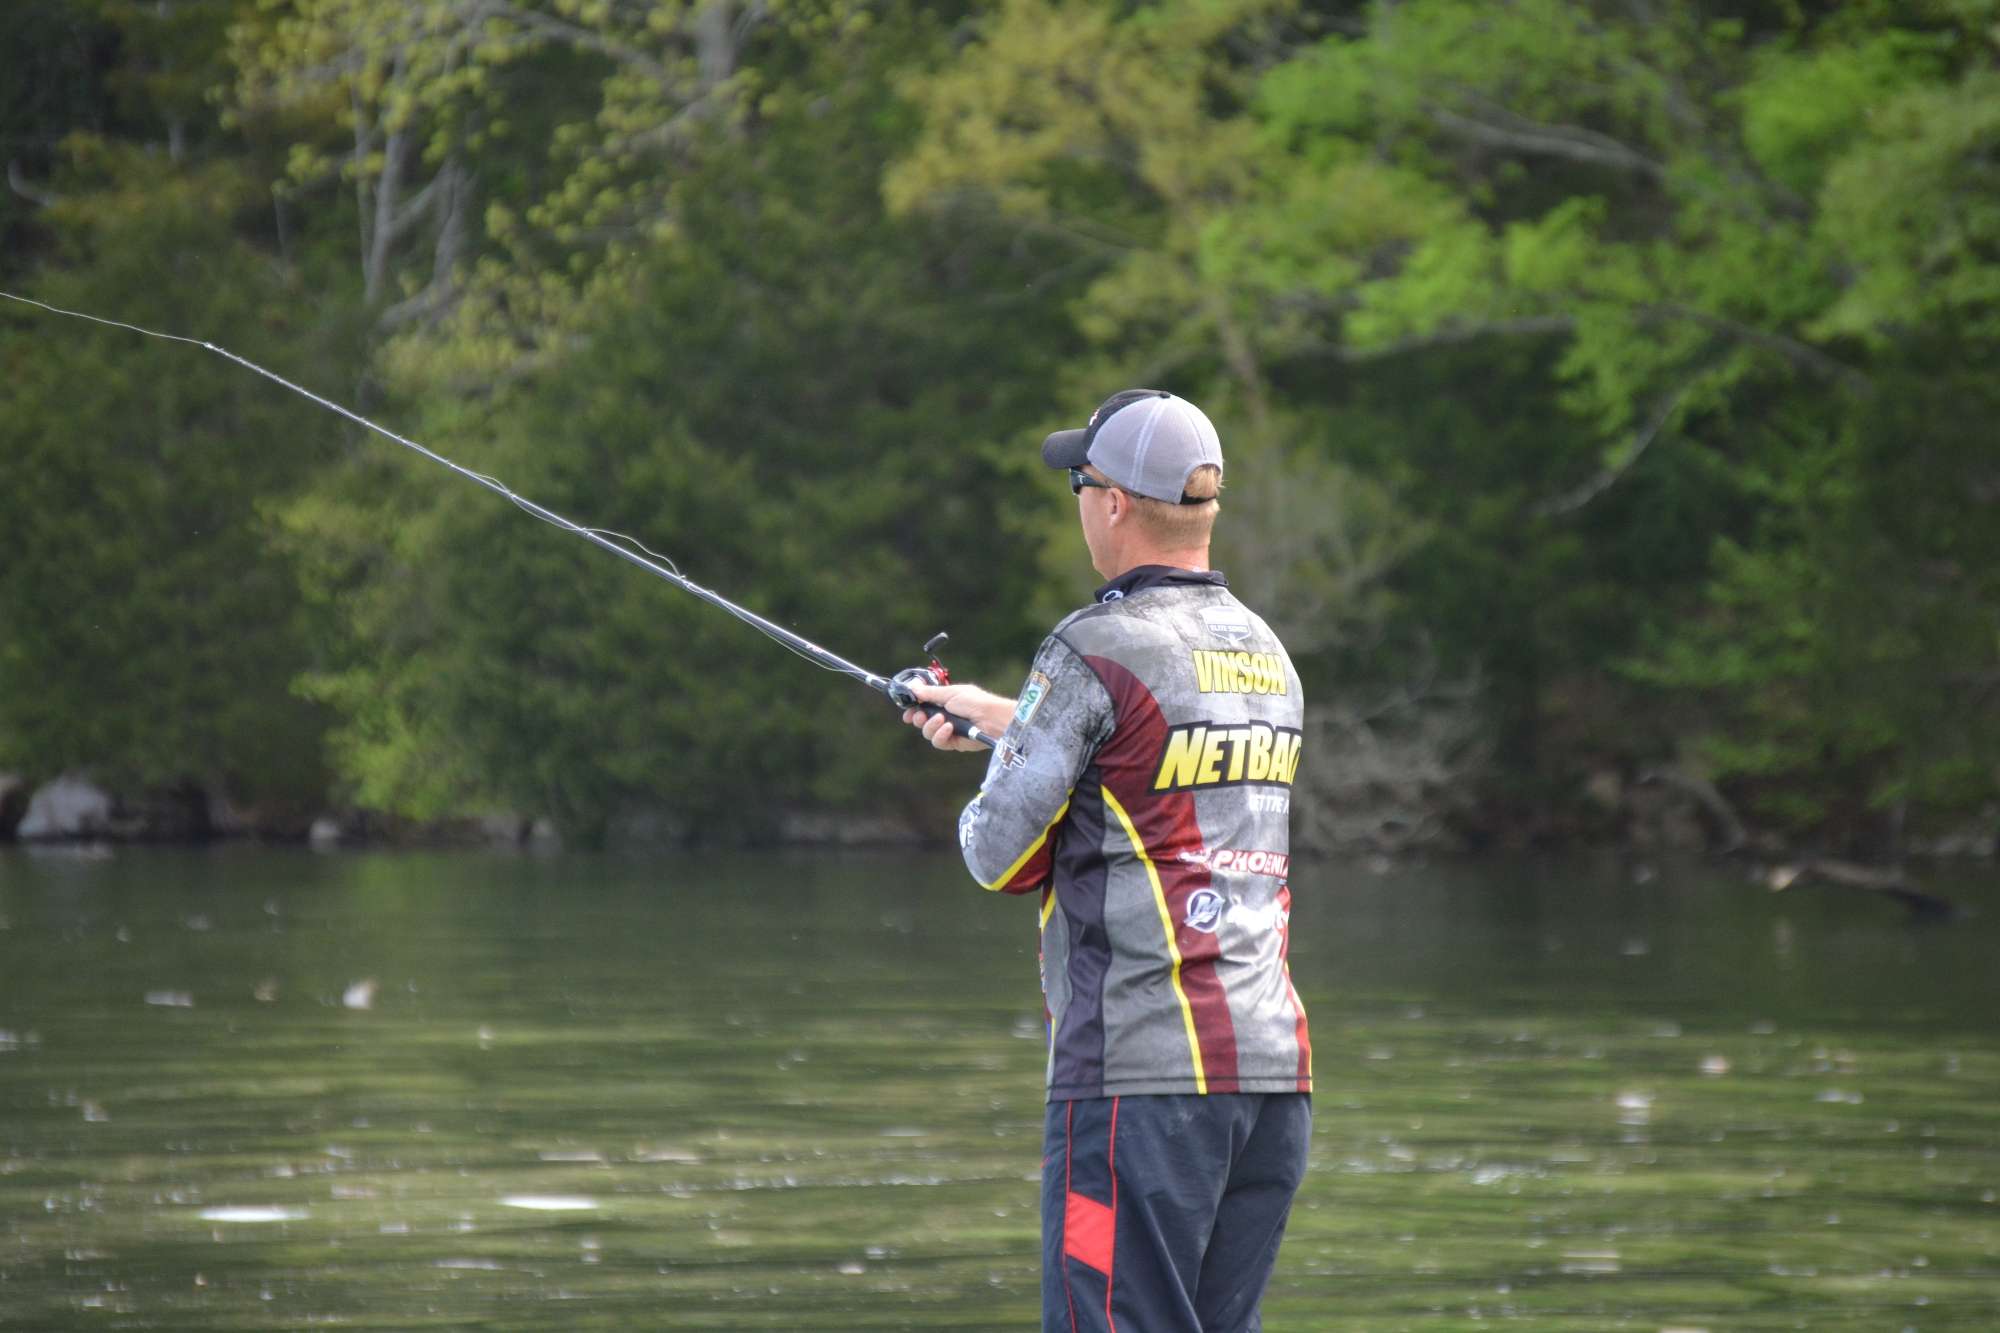 Vinson was in fourth place at the time on BASSTrakk and had about 14 pounds.